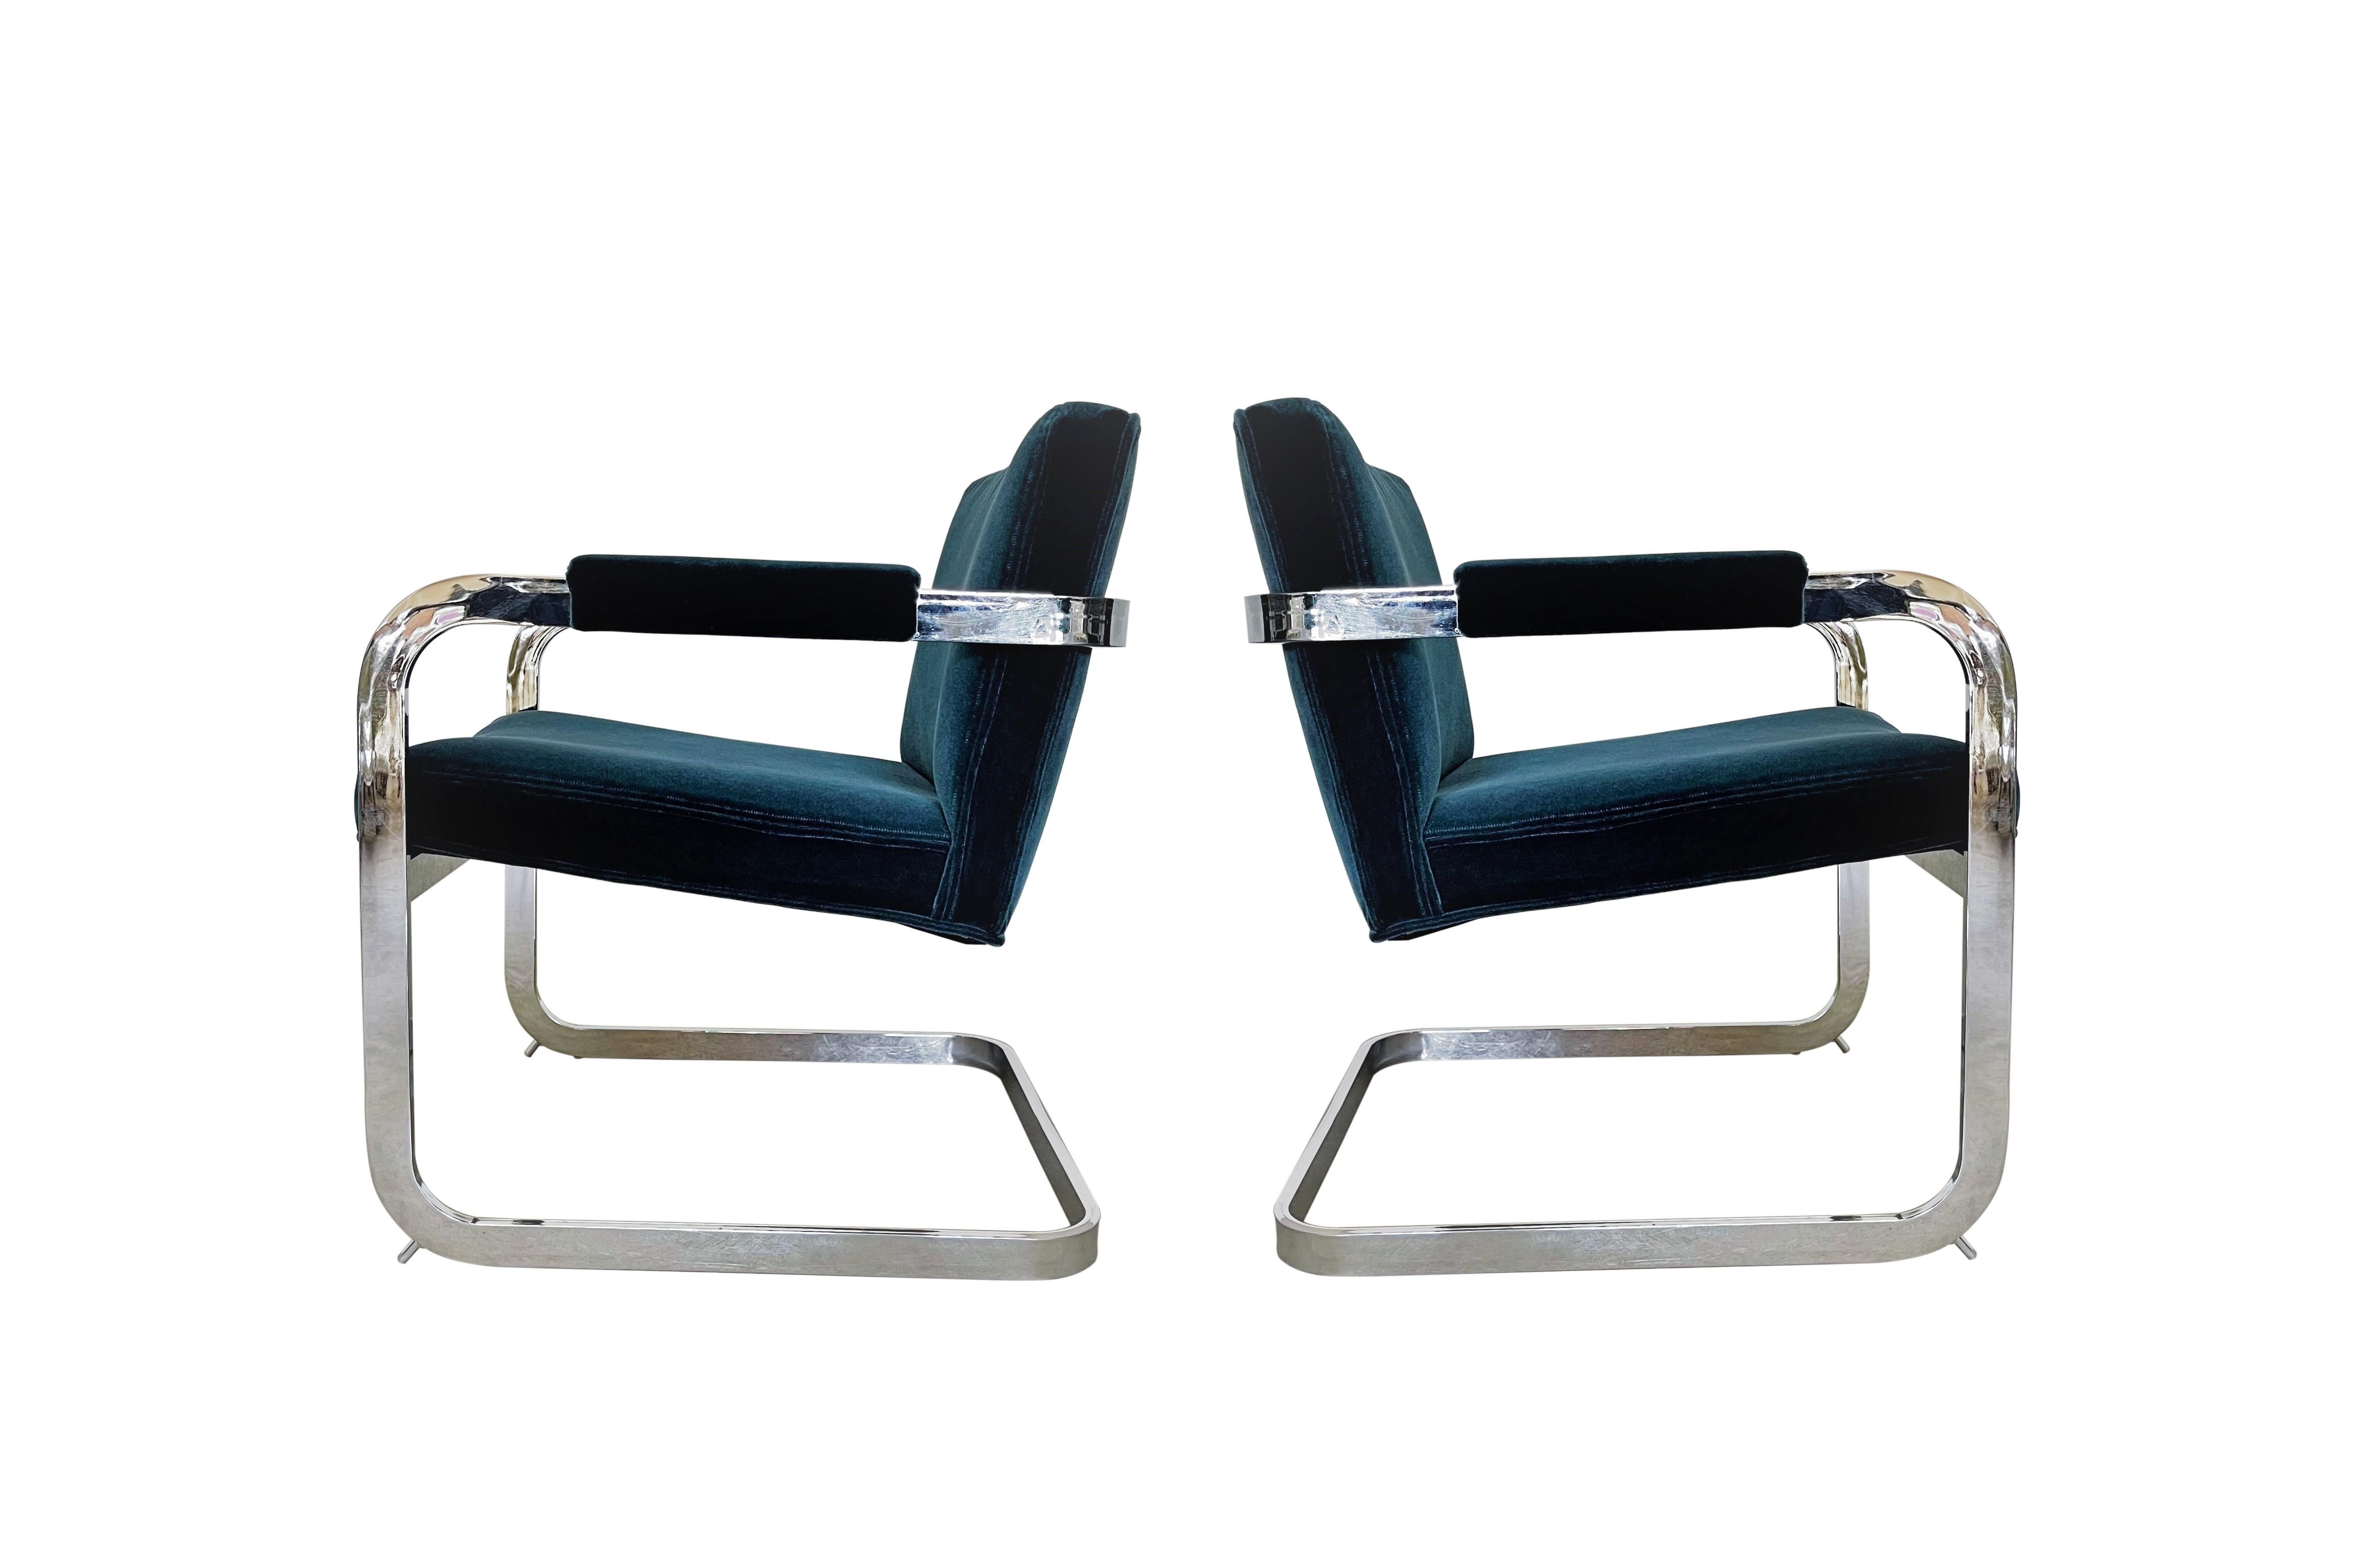 An attractive set of two side/armchairs designed by Milo Baughman for Thayer Coggin model #1188, are of mid-century form. Beautifully crafted chairs featuring soft padded backs, seats and armrests upholstered in a pacific blue mohair velvet over